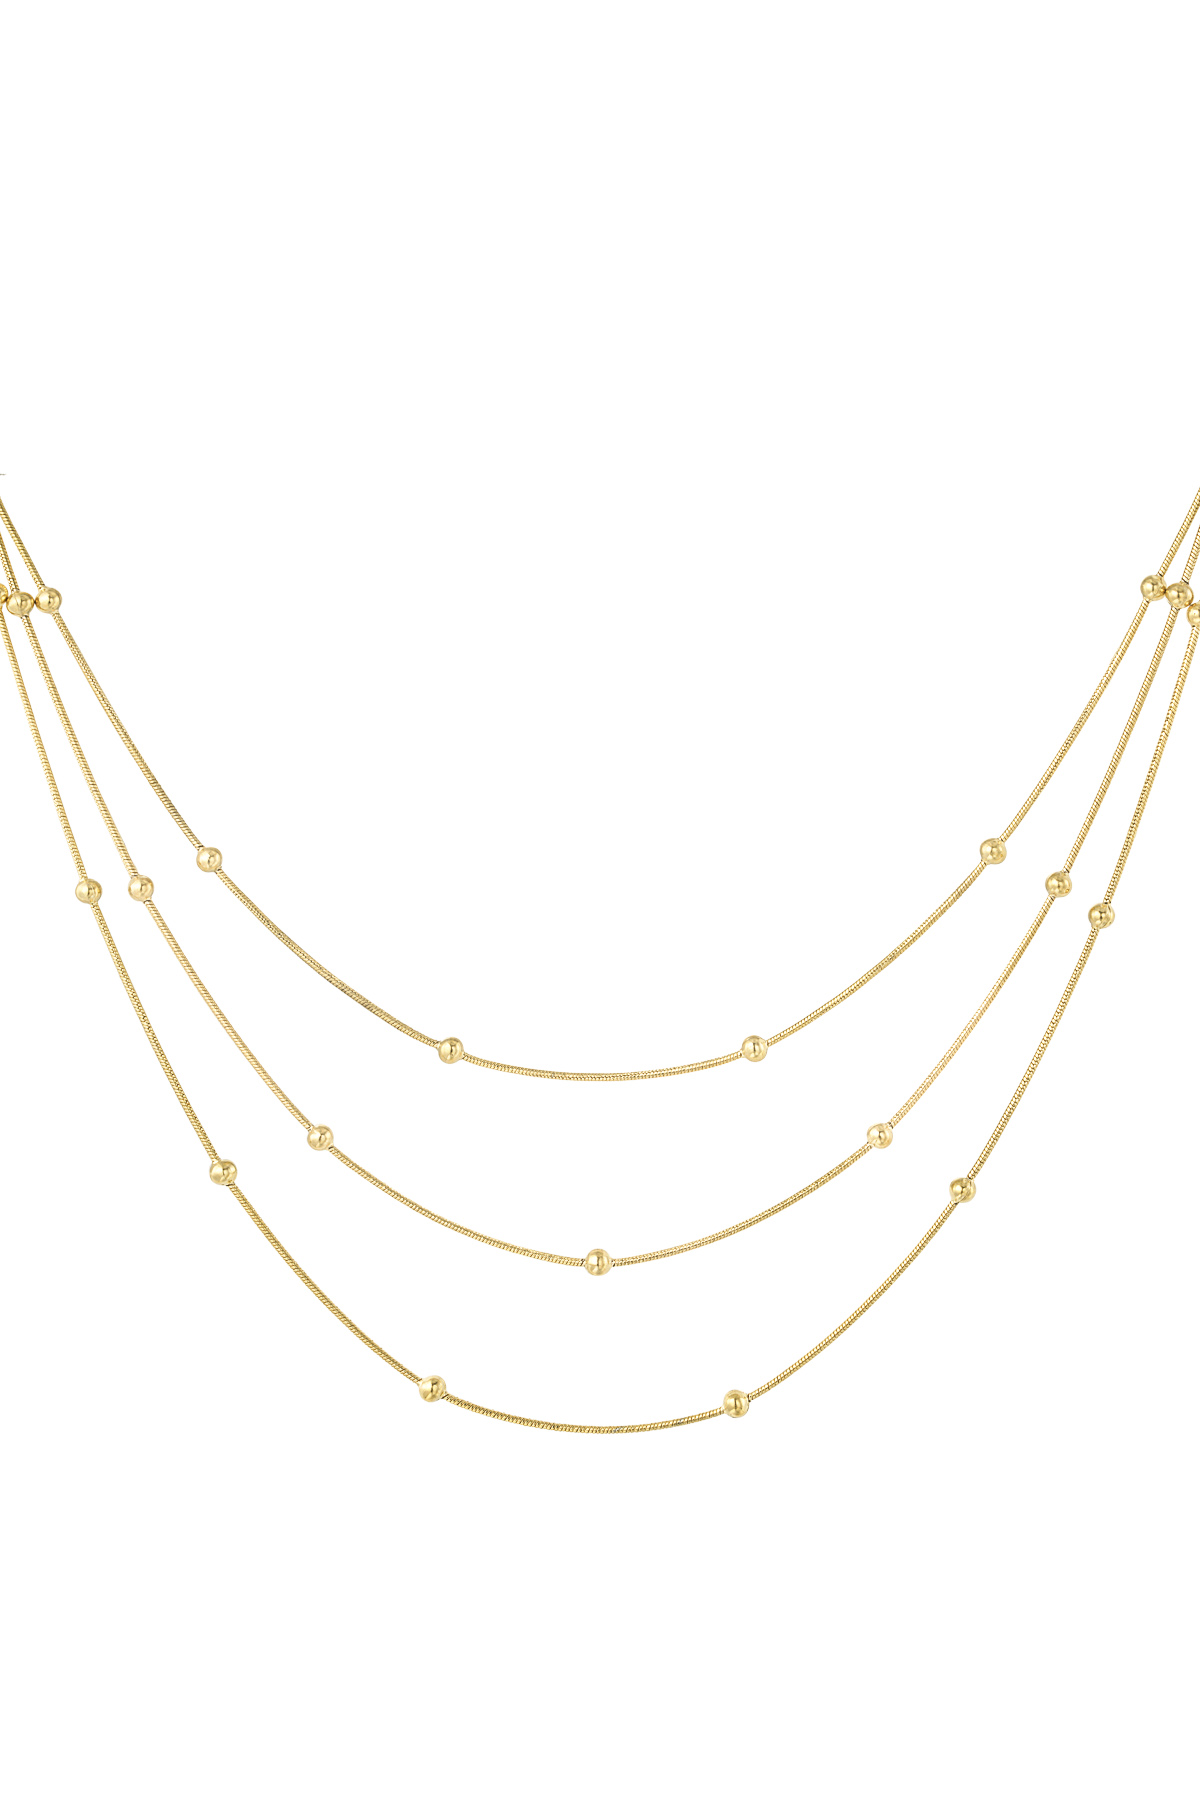 Necklace with a twist - gold